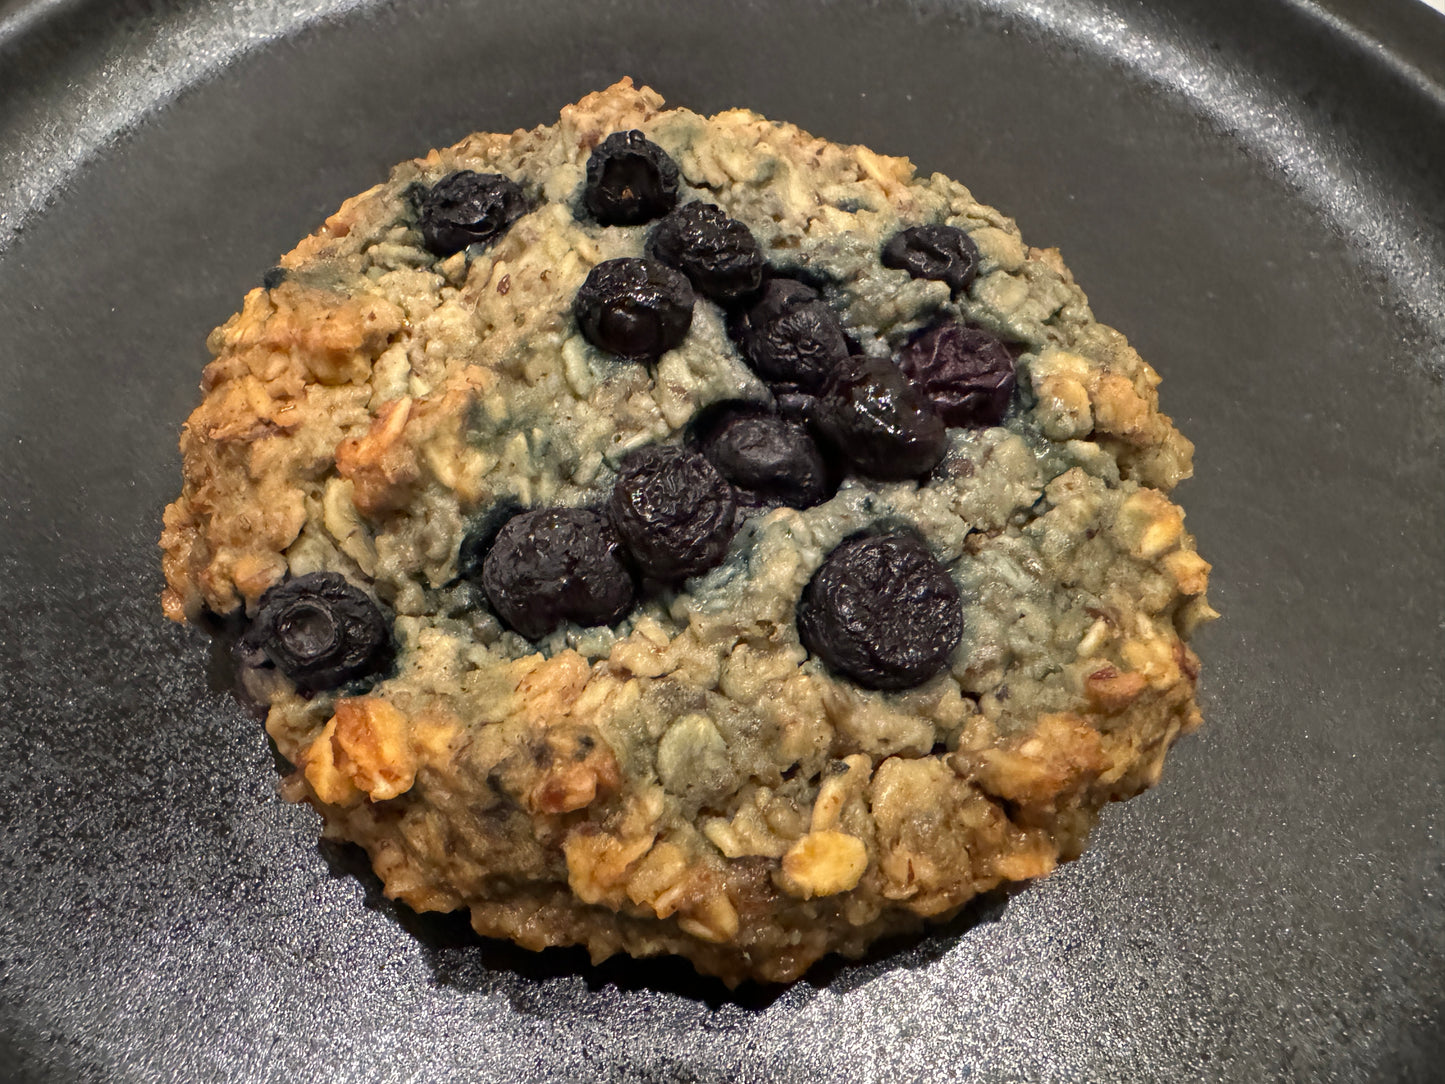 BLU BERRYMORE – Blueberry Meal Replacement Cookie